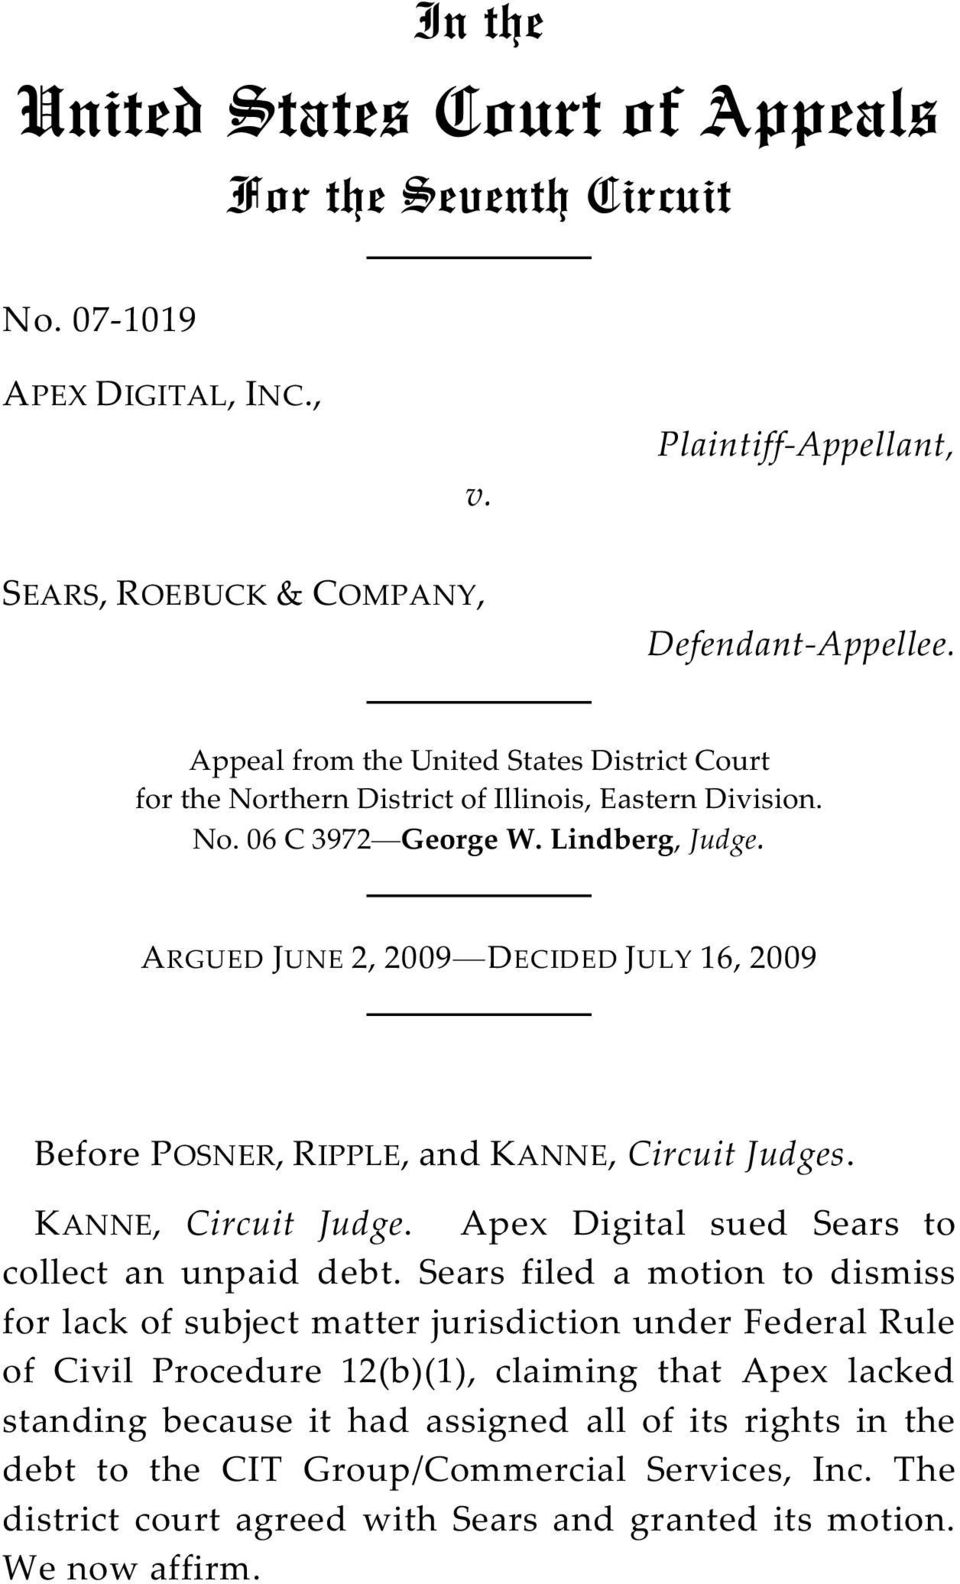 ARGUED JUNE 2, 2009 DECIDED JULY 16, 2009 Before POSNER, RIPPLE, and KANNE, Circuit Judges. KANNE, Circuit Judge. Apex Digital sued Sears to collect an unpaid debt.